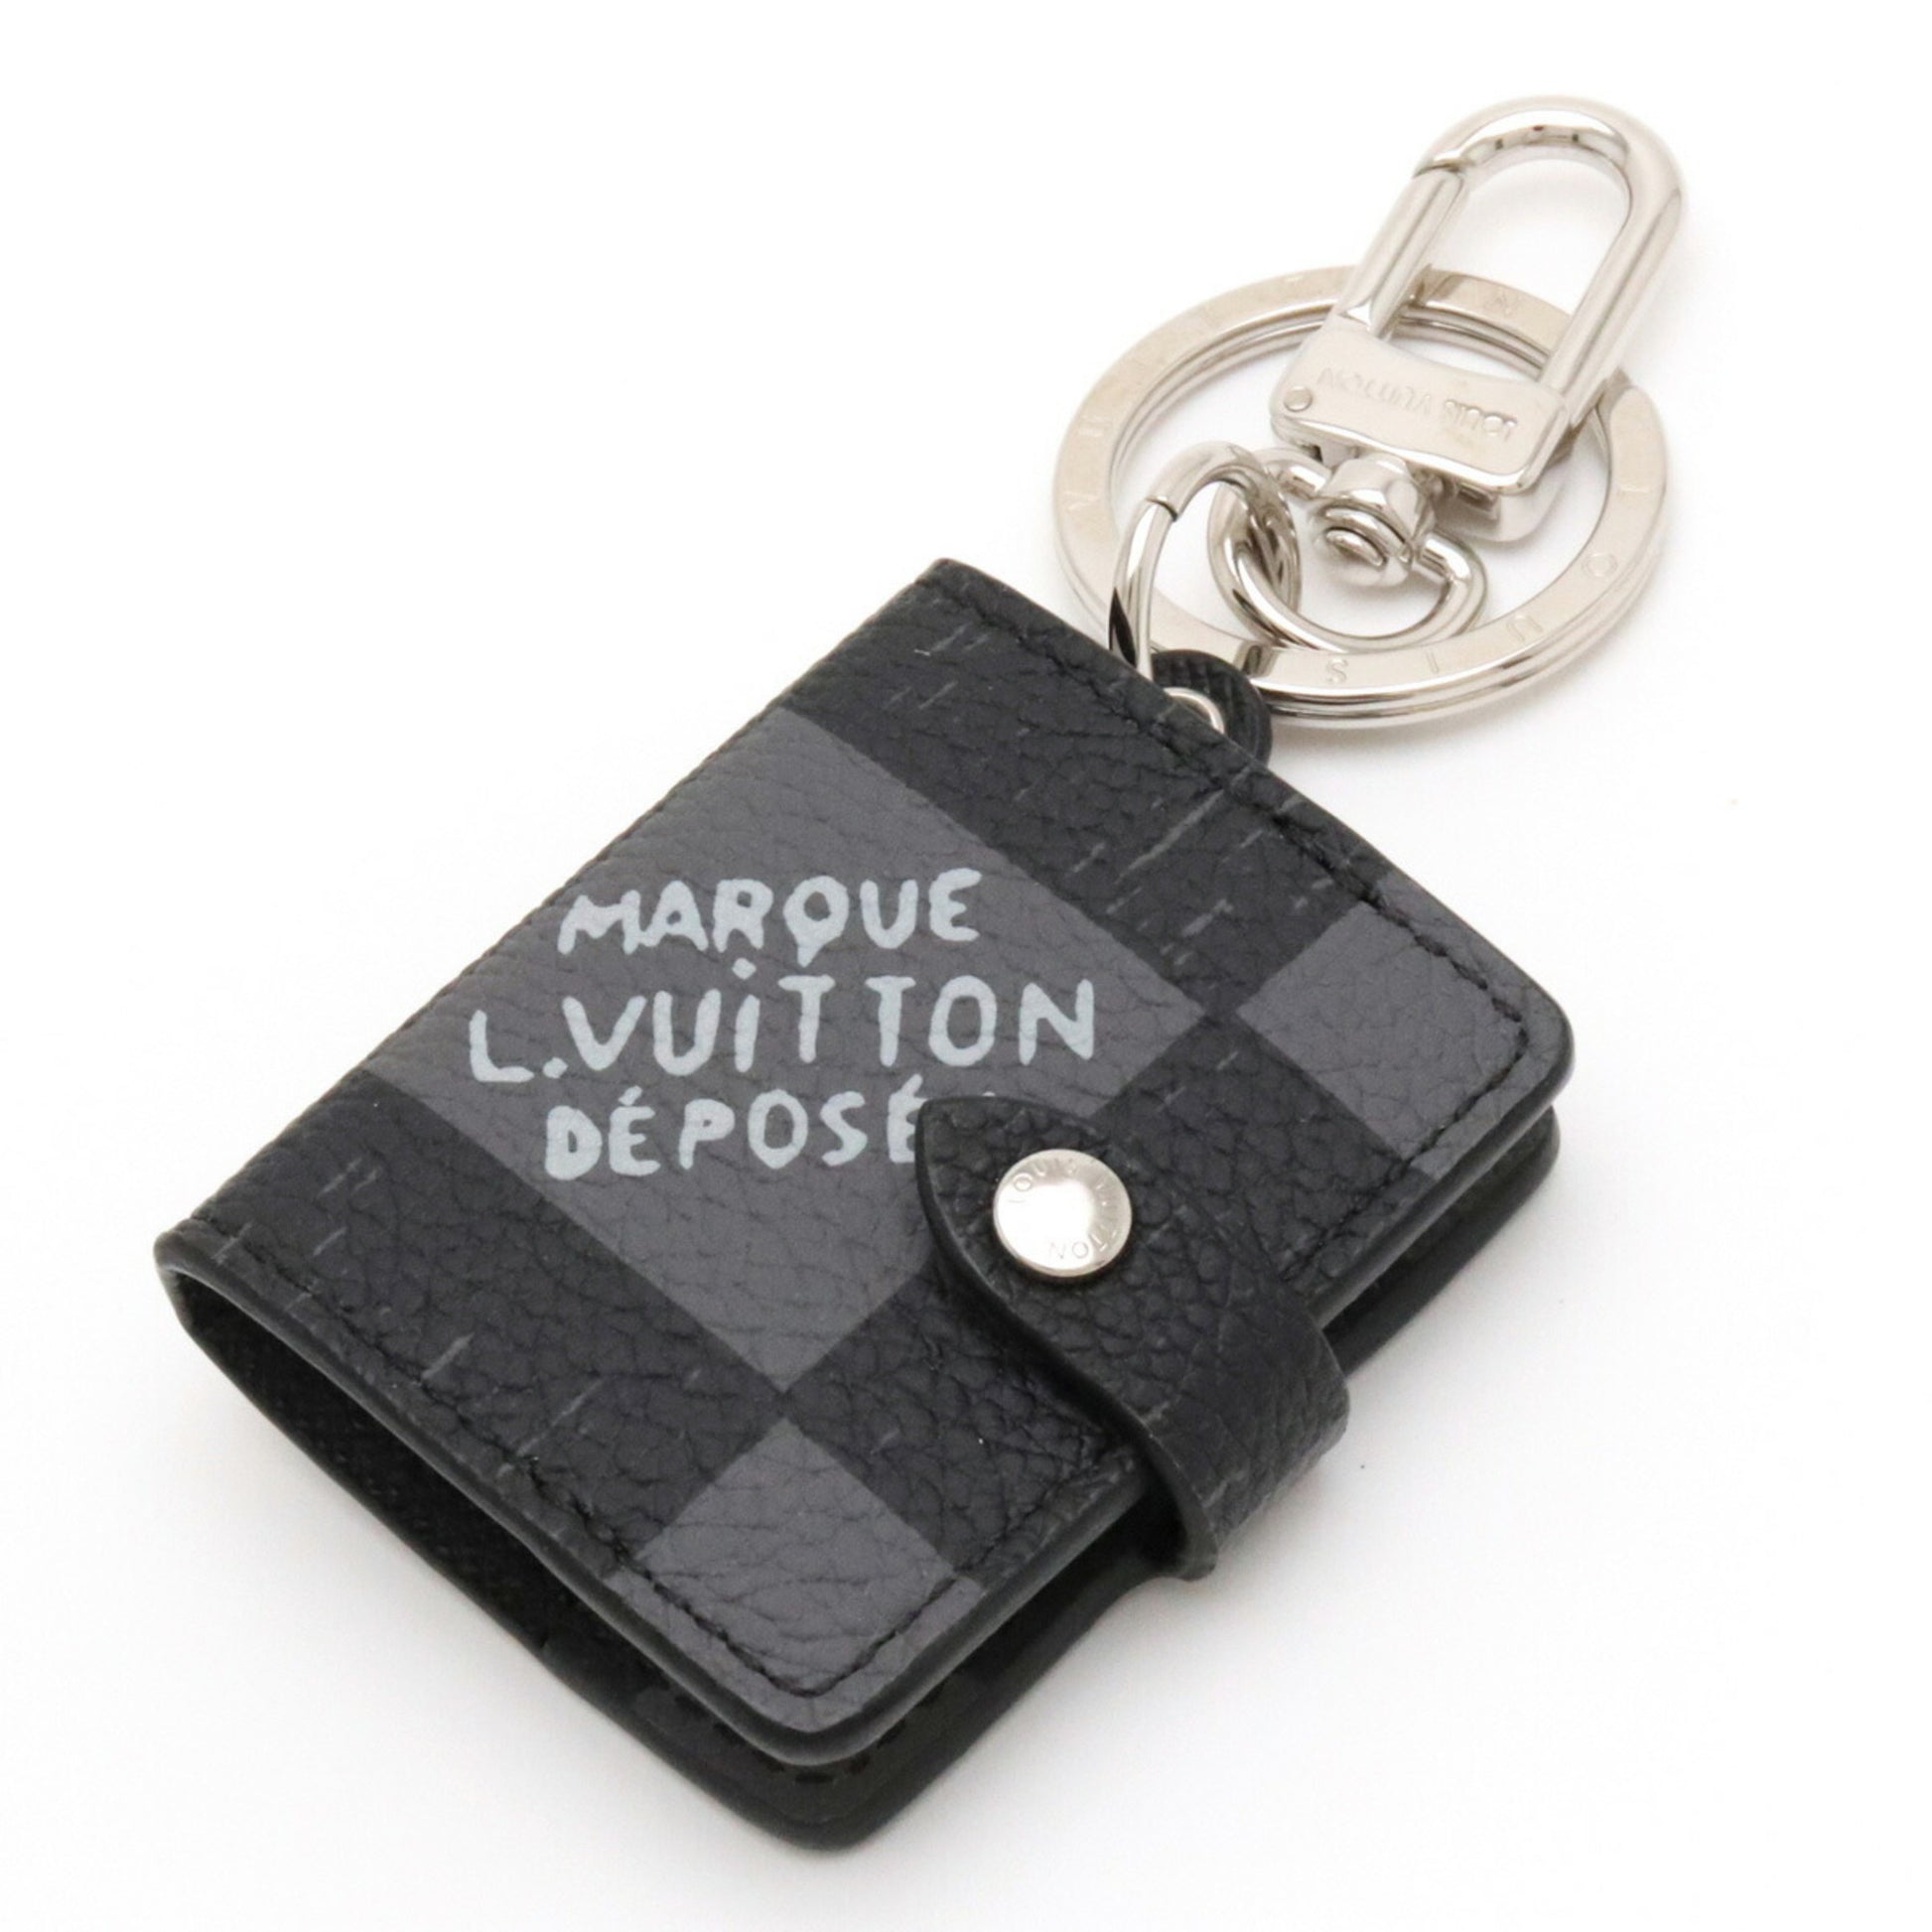 Louis Vuitton DAMIER Damier archives notebook bag charm and key